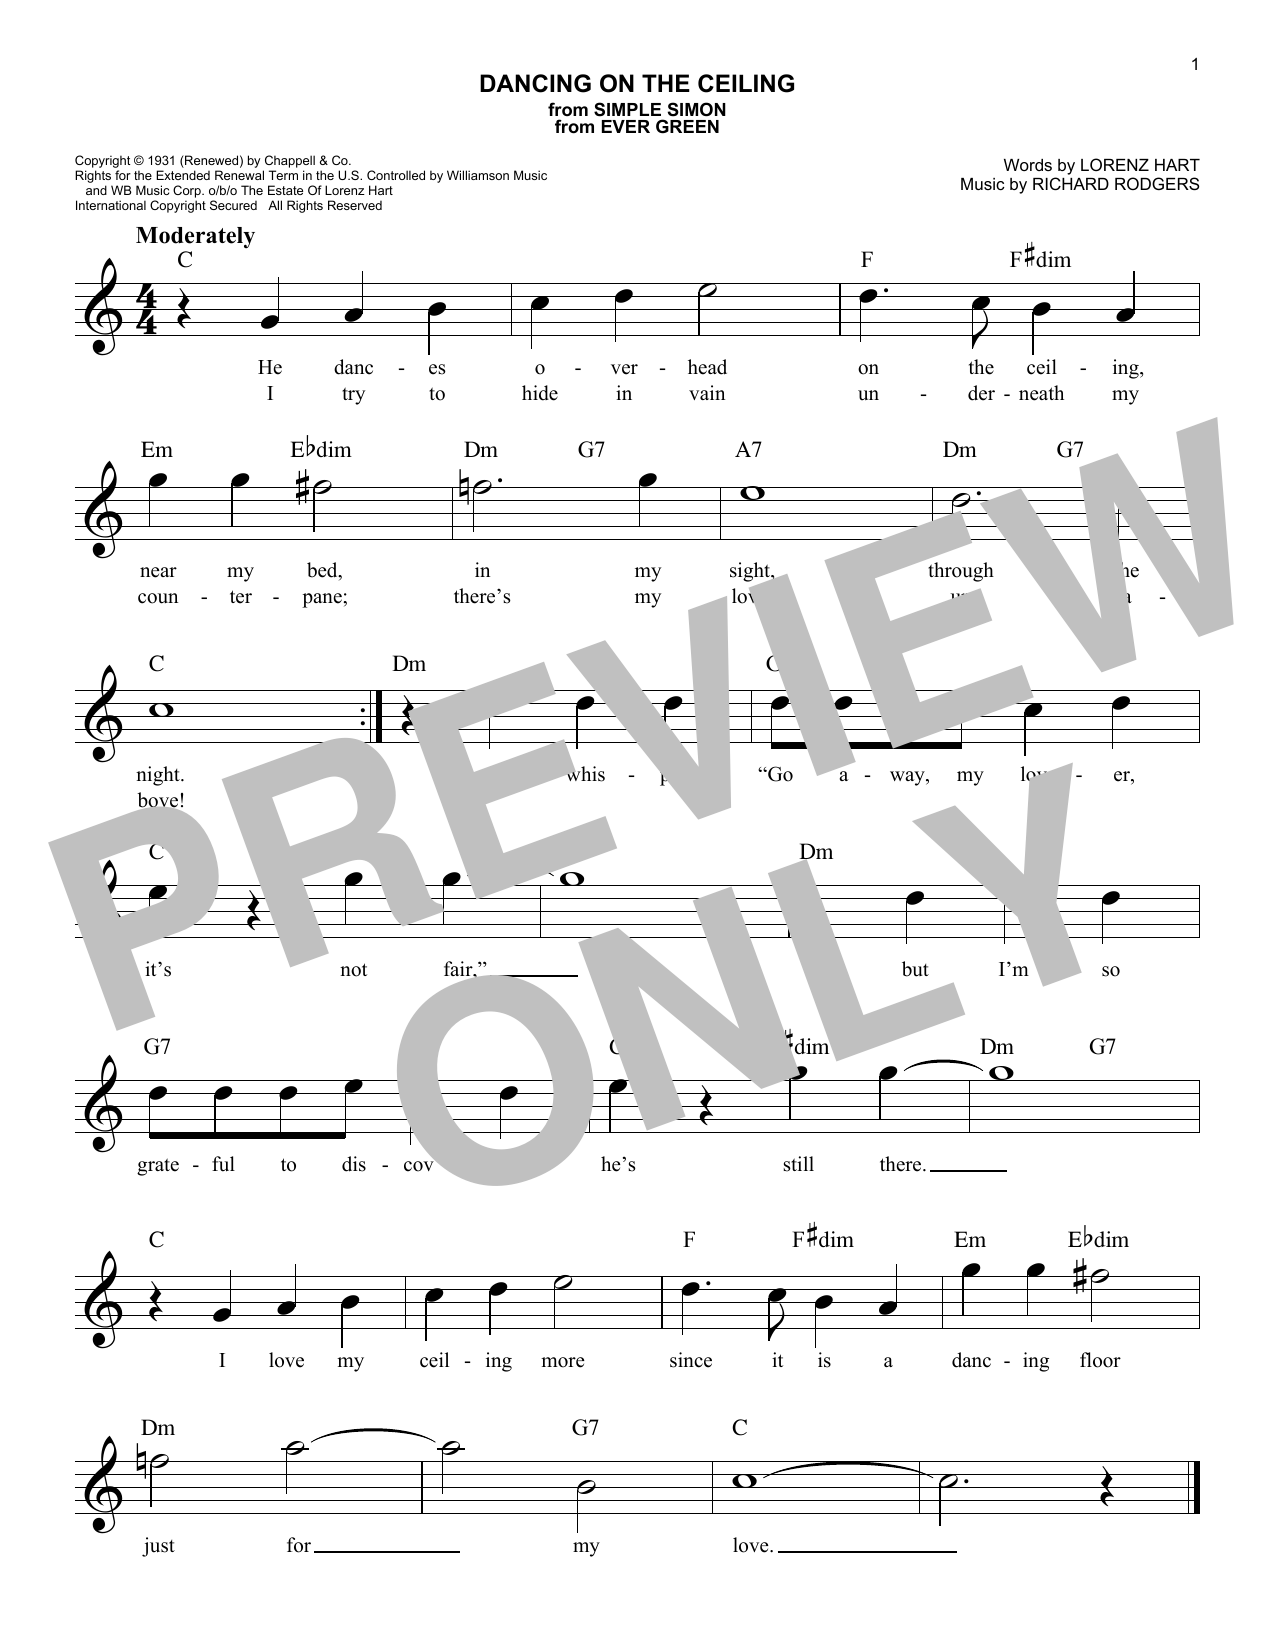 Download Richard Rodgers Dancing On The Ceiling Sheet Music